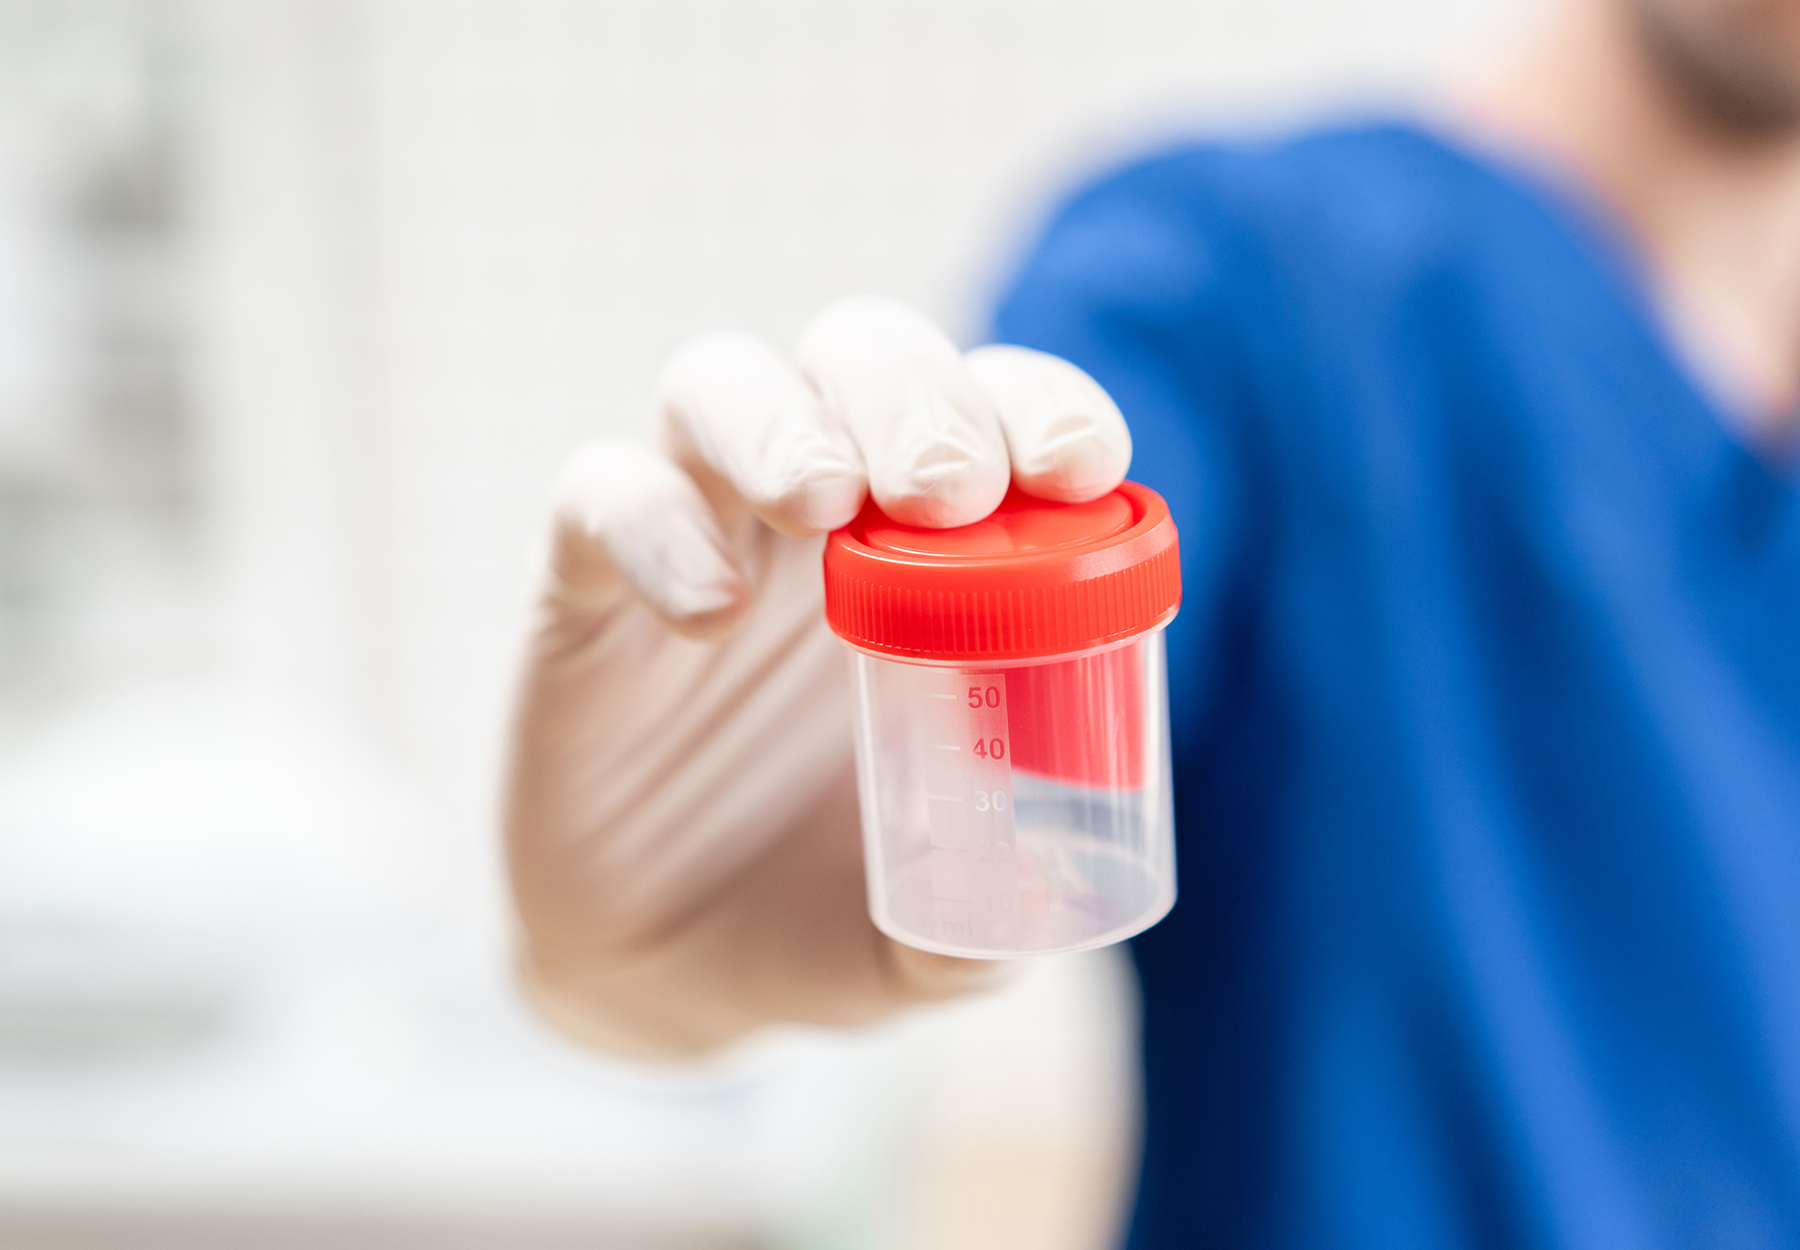 Doctor in blue uniform and latex gloves is holding an empty plastic container for taking urine samples, light background. Medical concept. stock photo